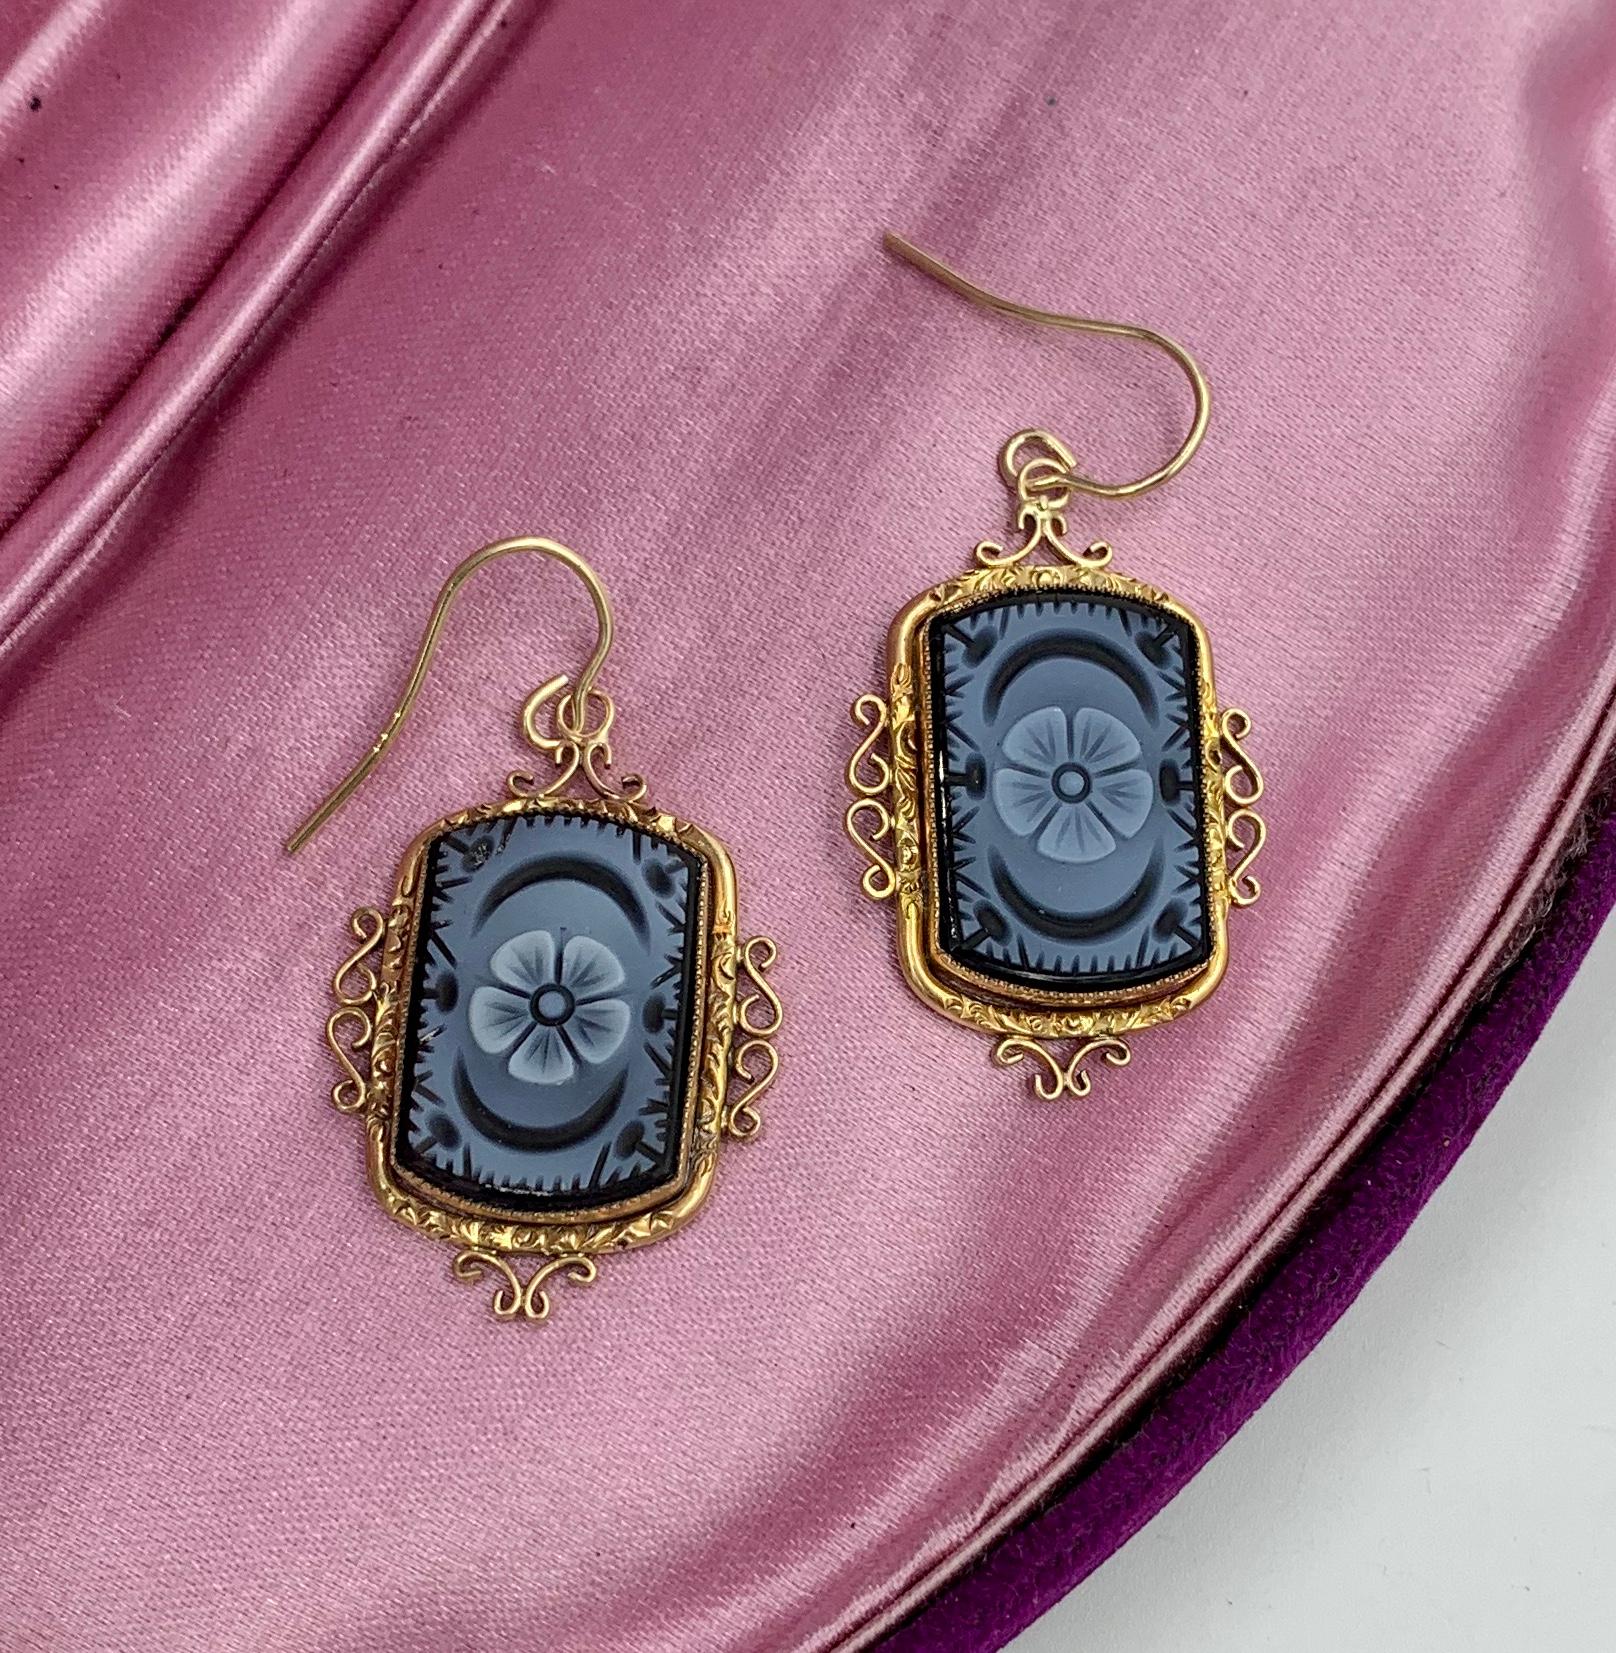 A spectacular pair of Antique Victorian hardstone Flower Cameo Pendant Dangle Drop Earrings in 14 Karat Gold.   These stunning earrings are of the highest quality.  They have extraordinary hand carved Cameos in Onyx with a central flower with a